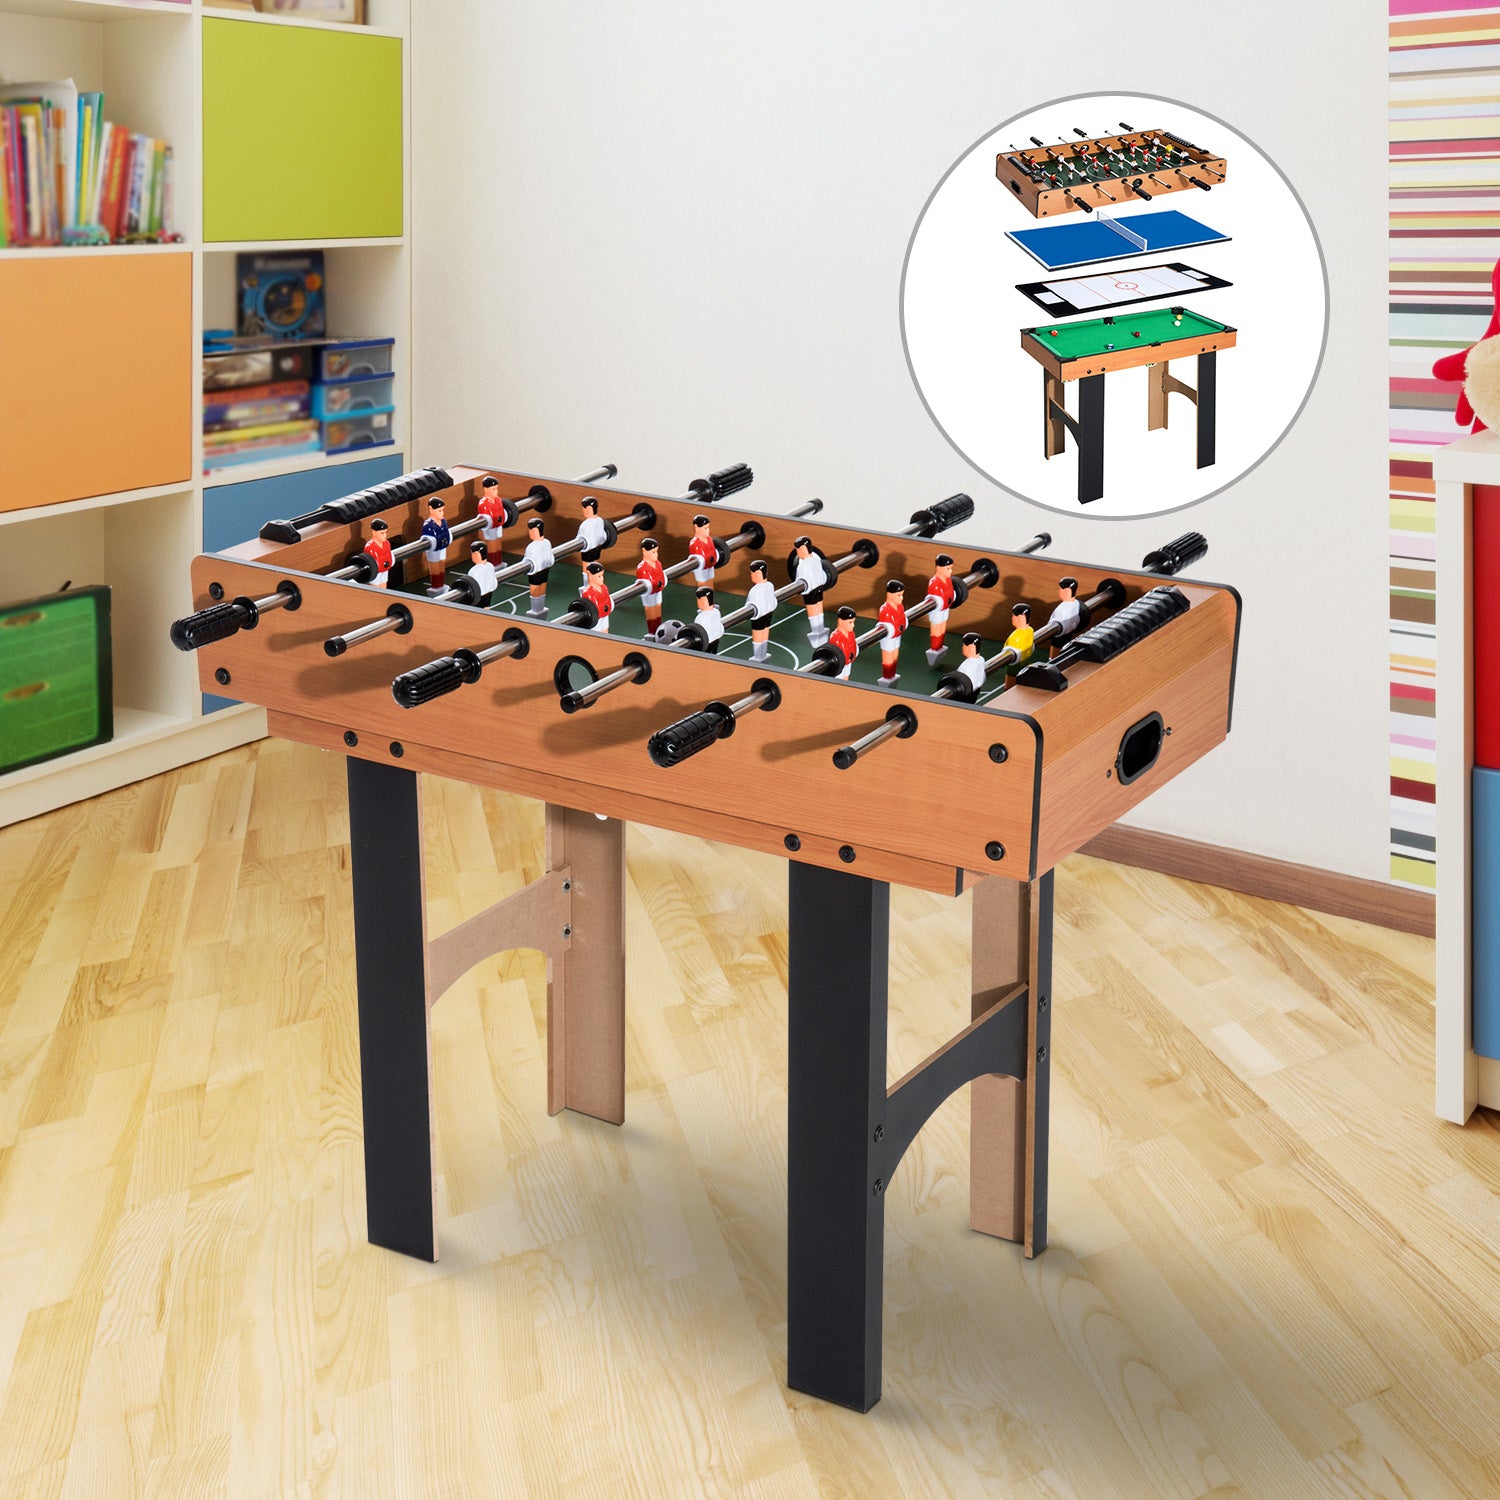 Nancy's Eagan Game table - Table football - Table tennis - Hockey - Billiards - 4-in-1 - MDF - Accessories - Compact